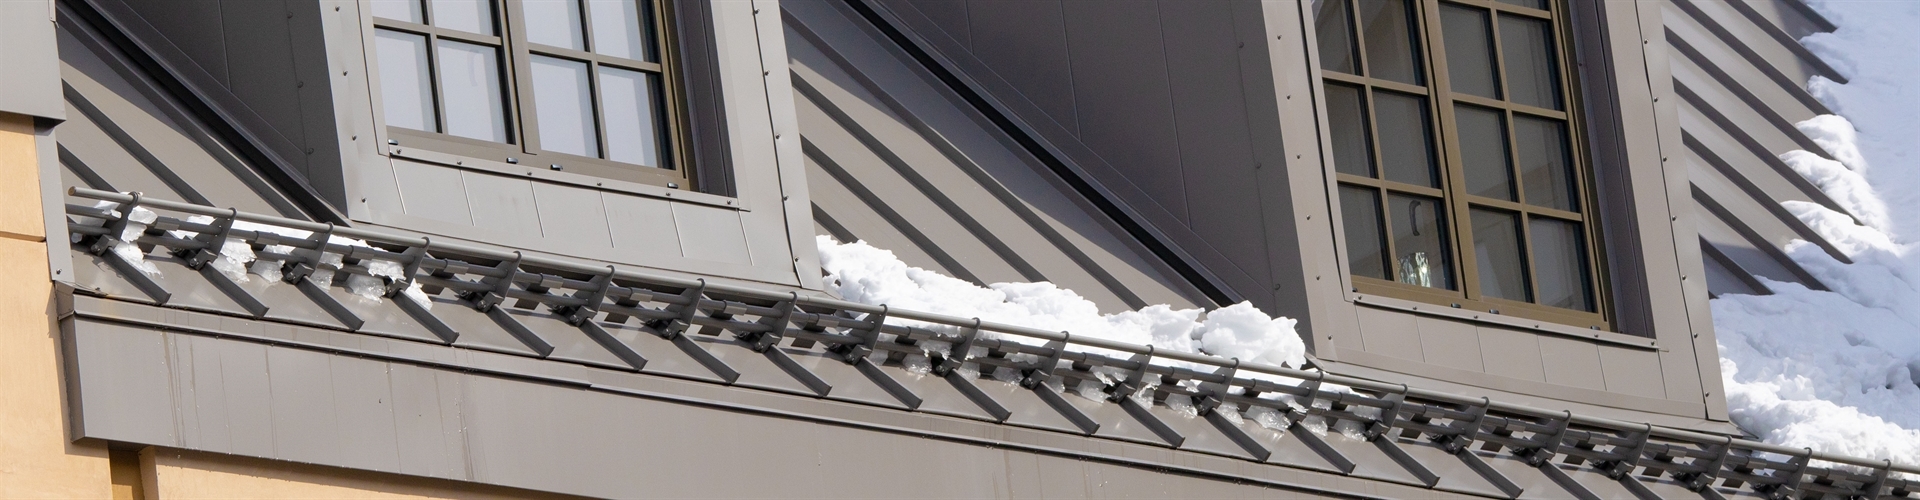 installing snow guards for metal roofs